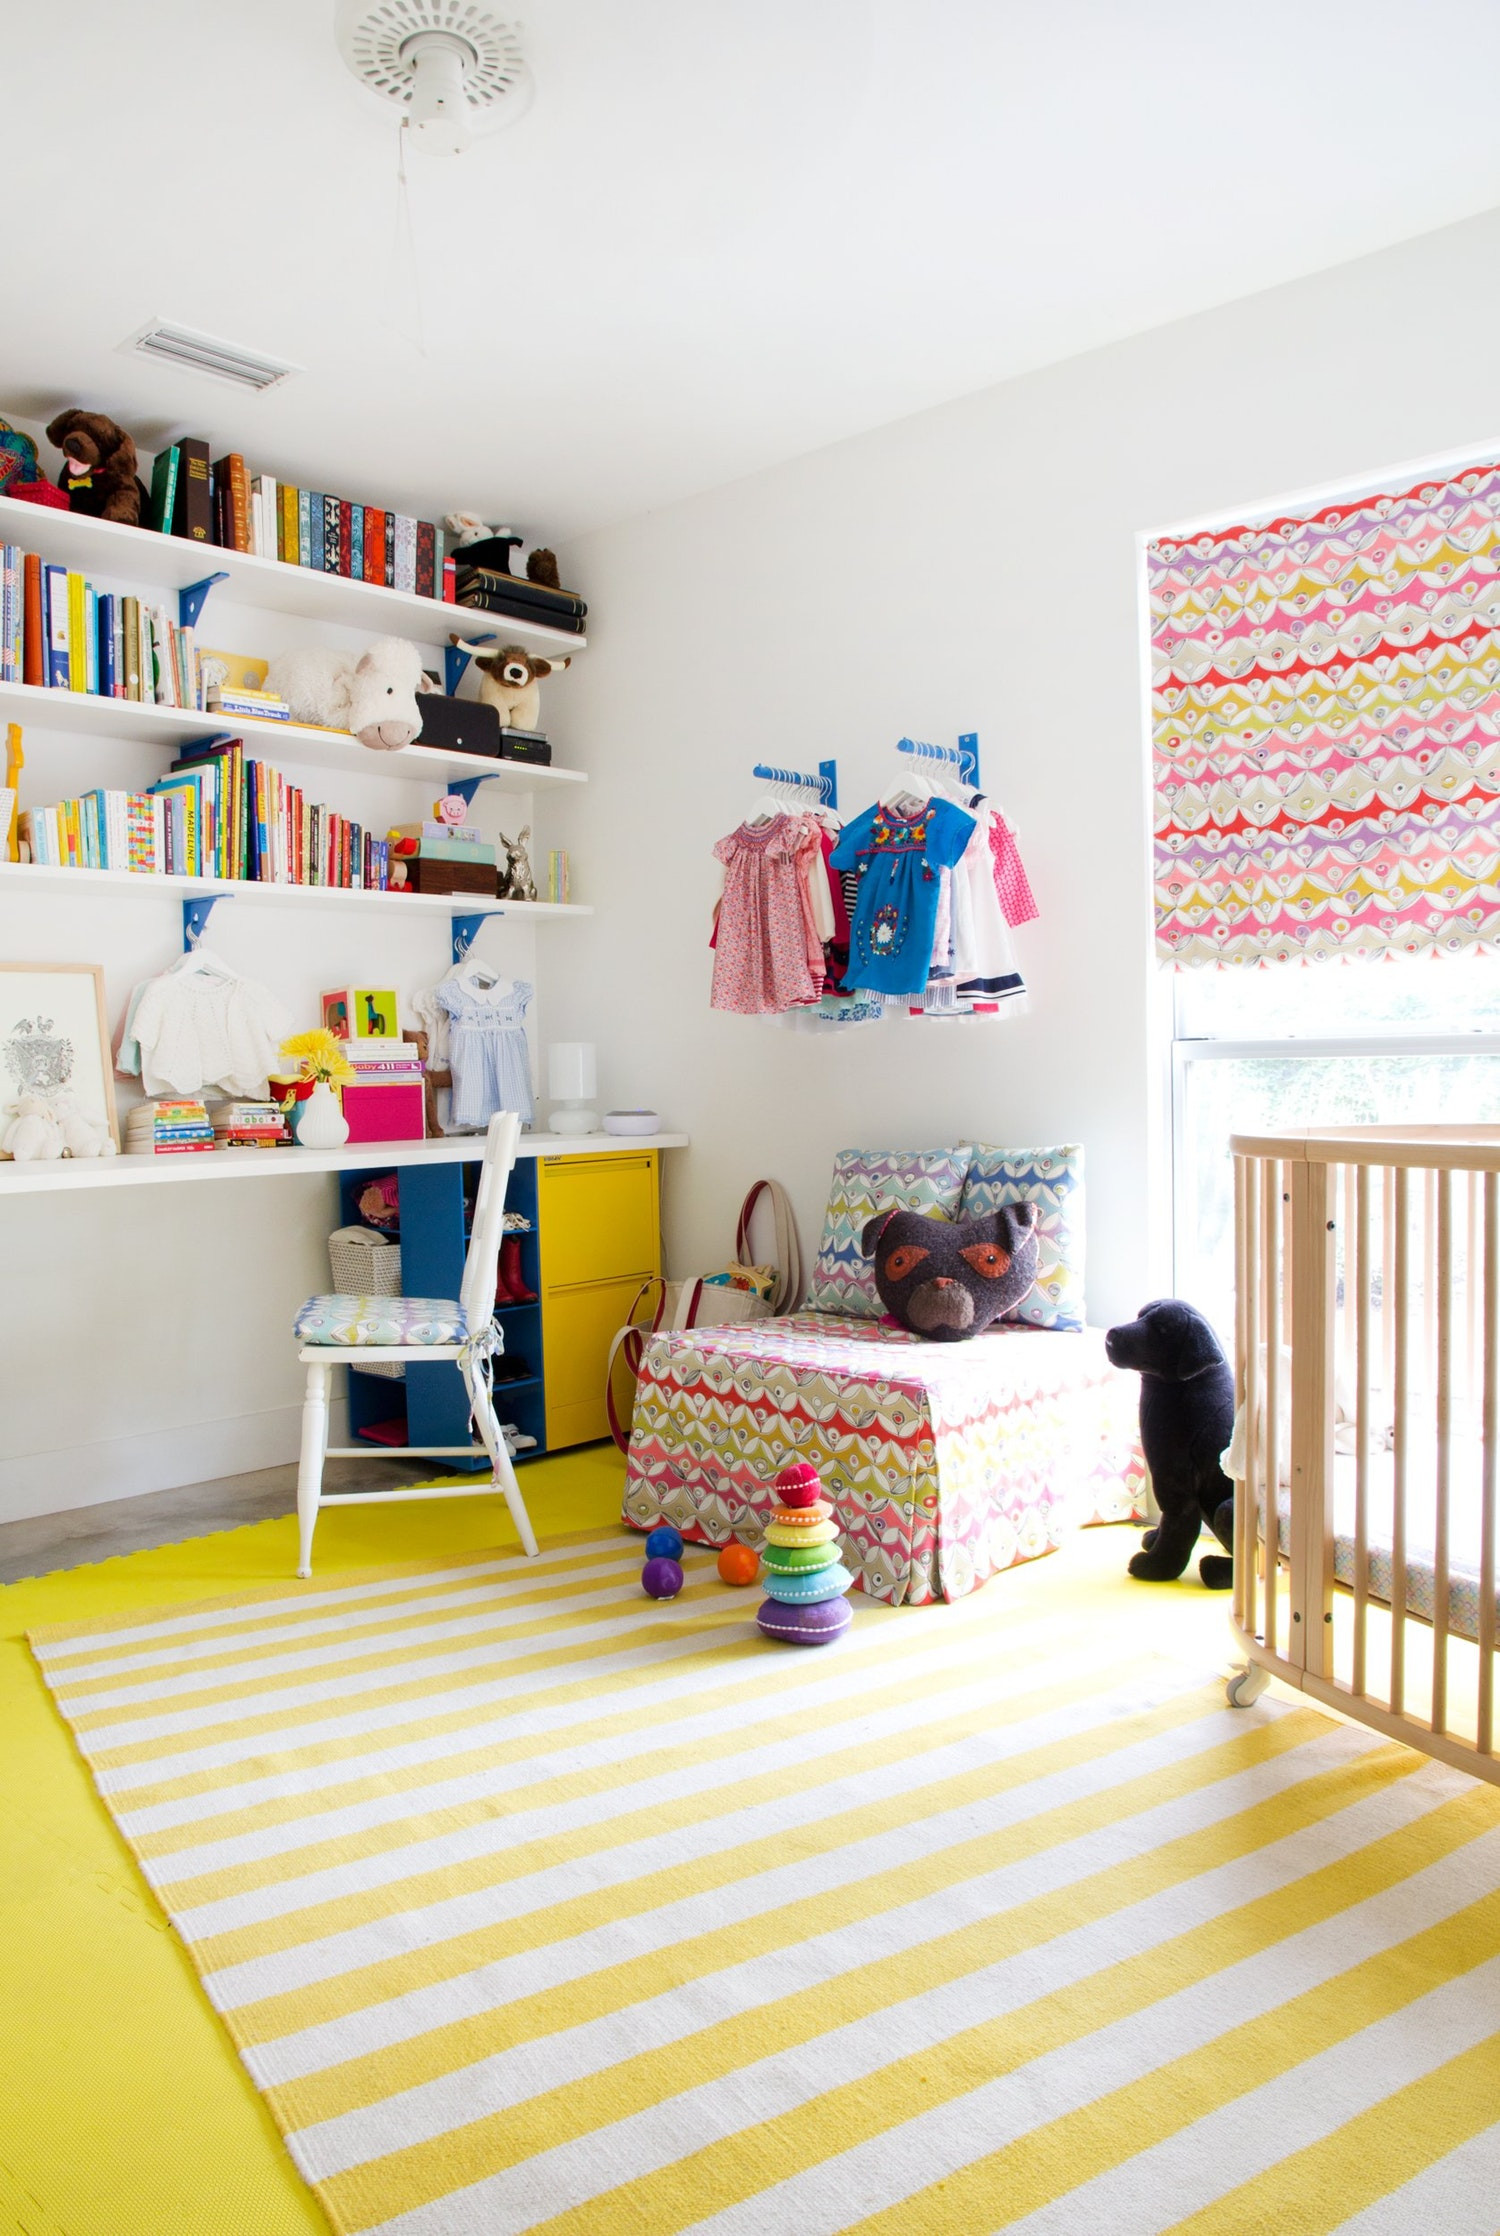 Kids Room Shelving
 30 Smart Storage Ideas for Small Spaces